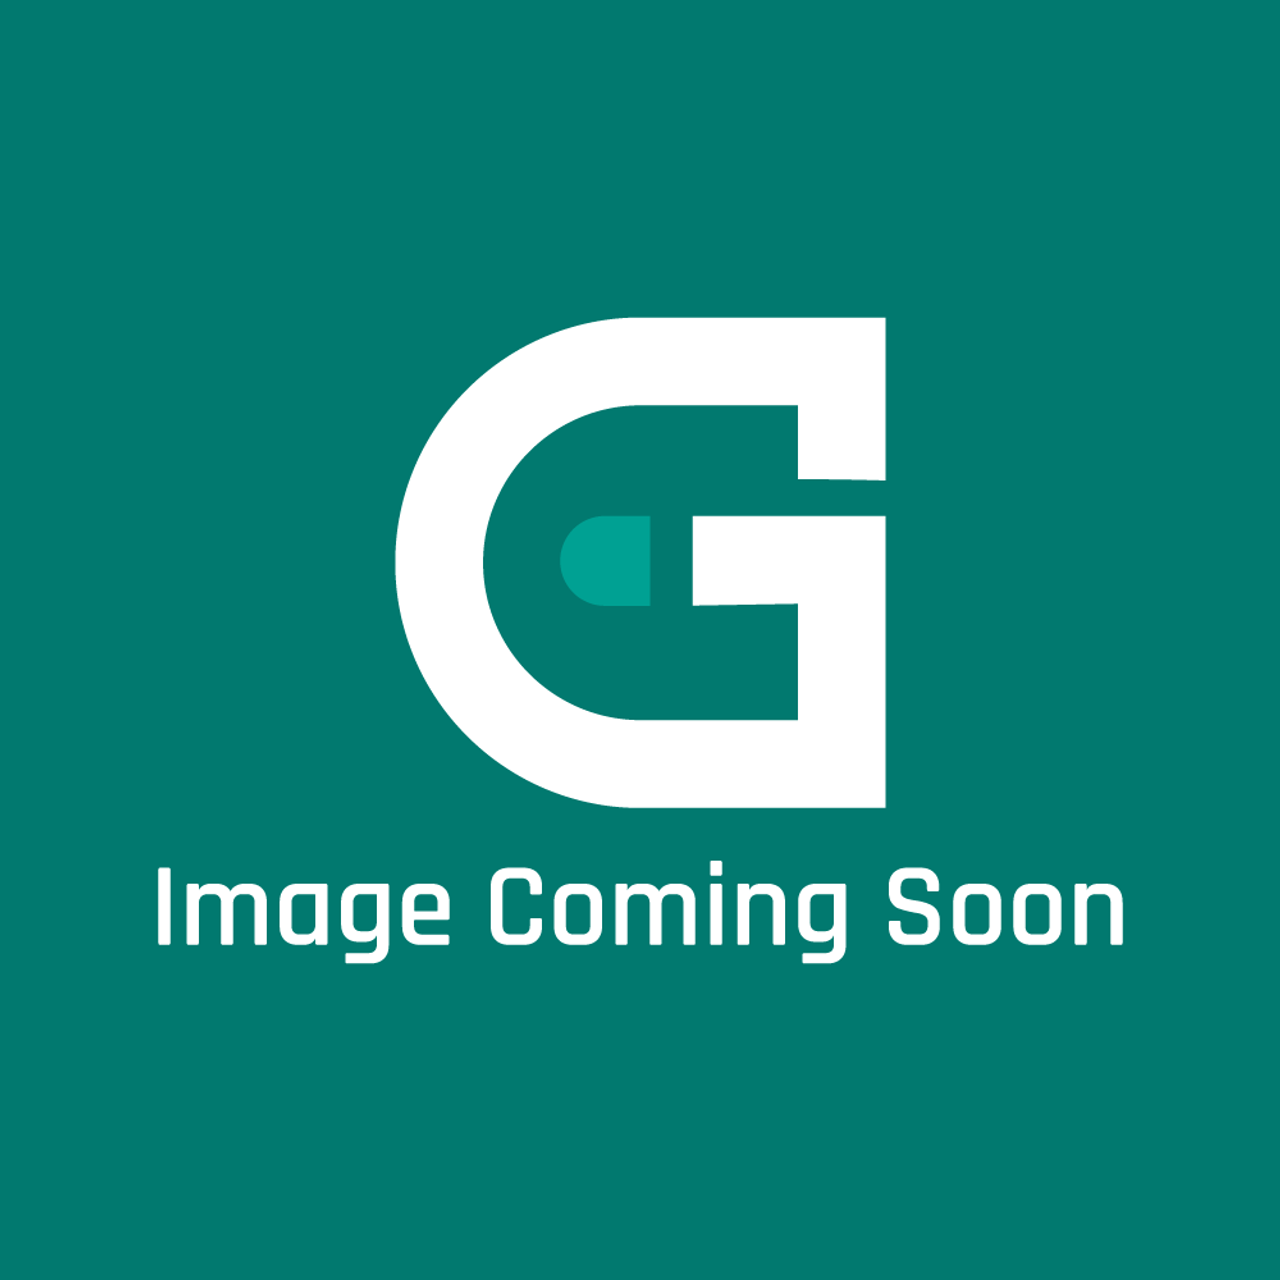 AGA Marvel SKD-W10169167 - Dishwasher Clamp - Image Coming Soon!